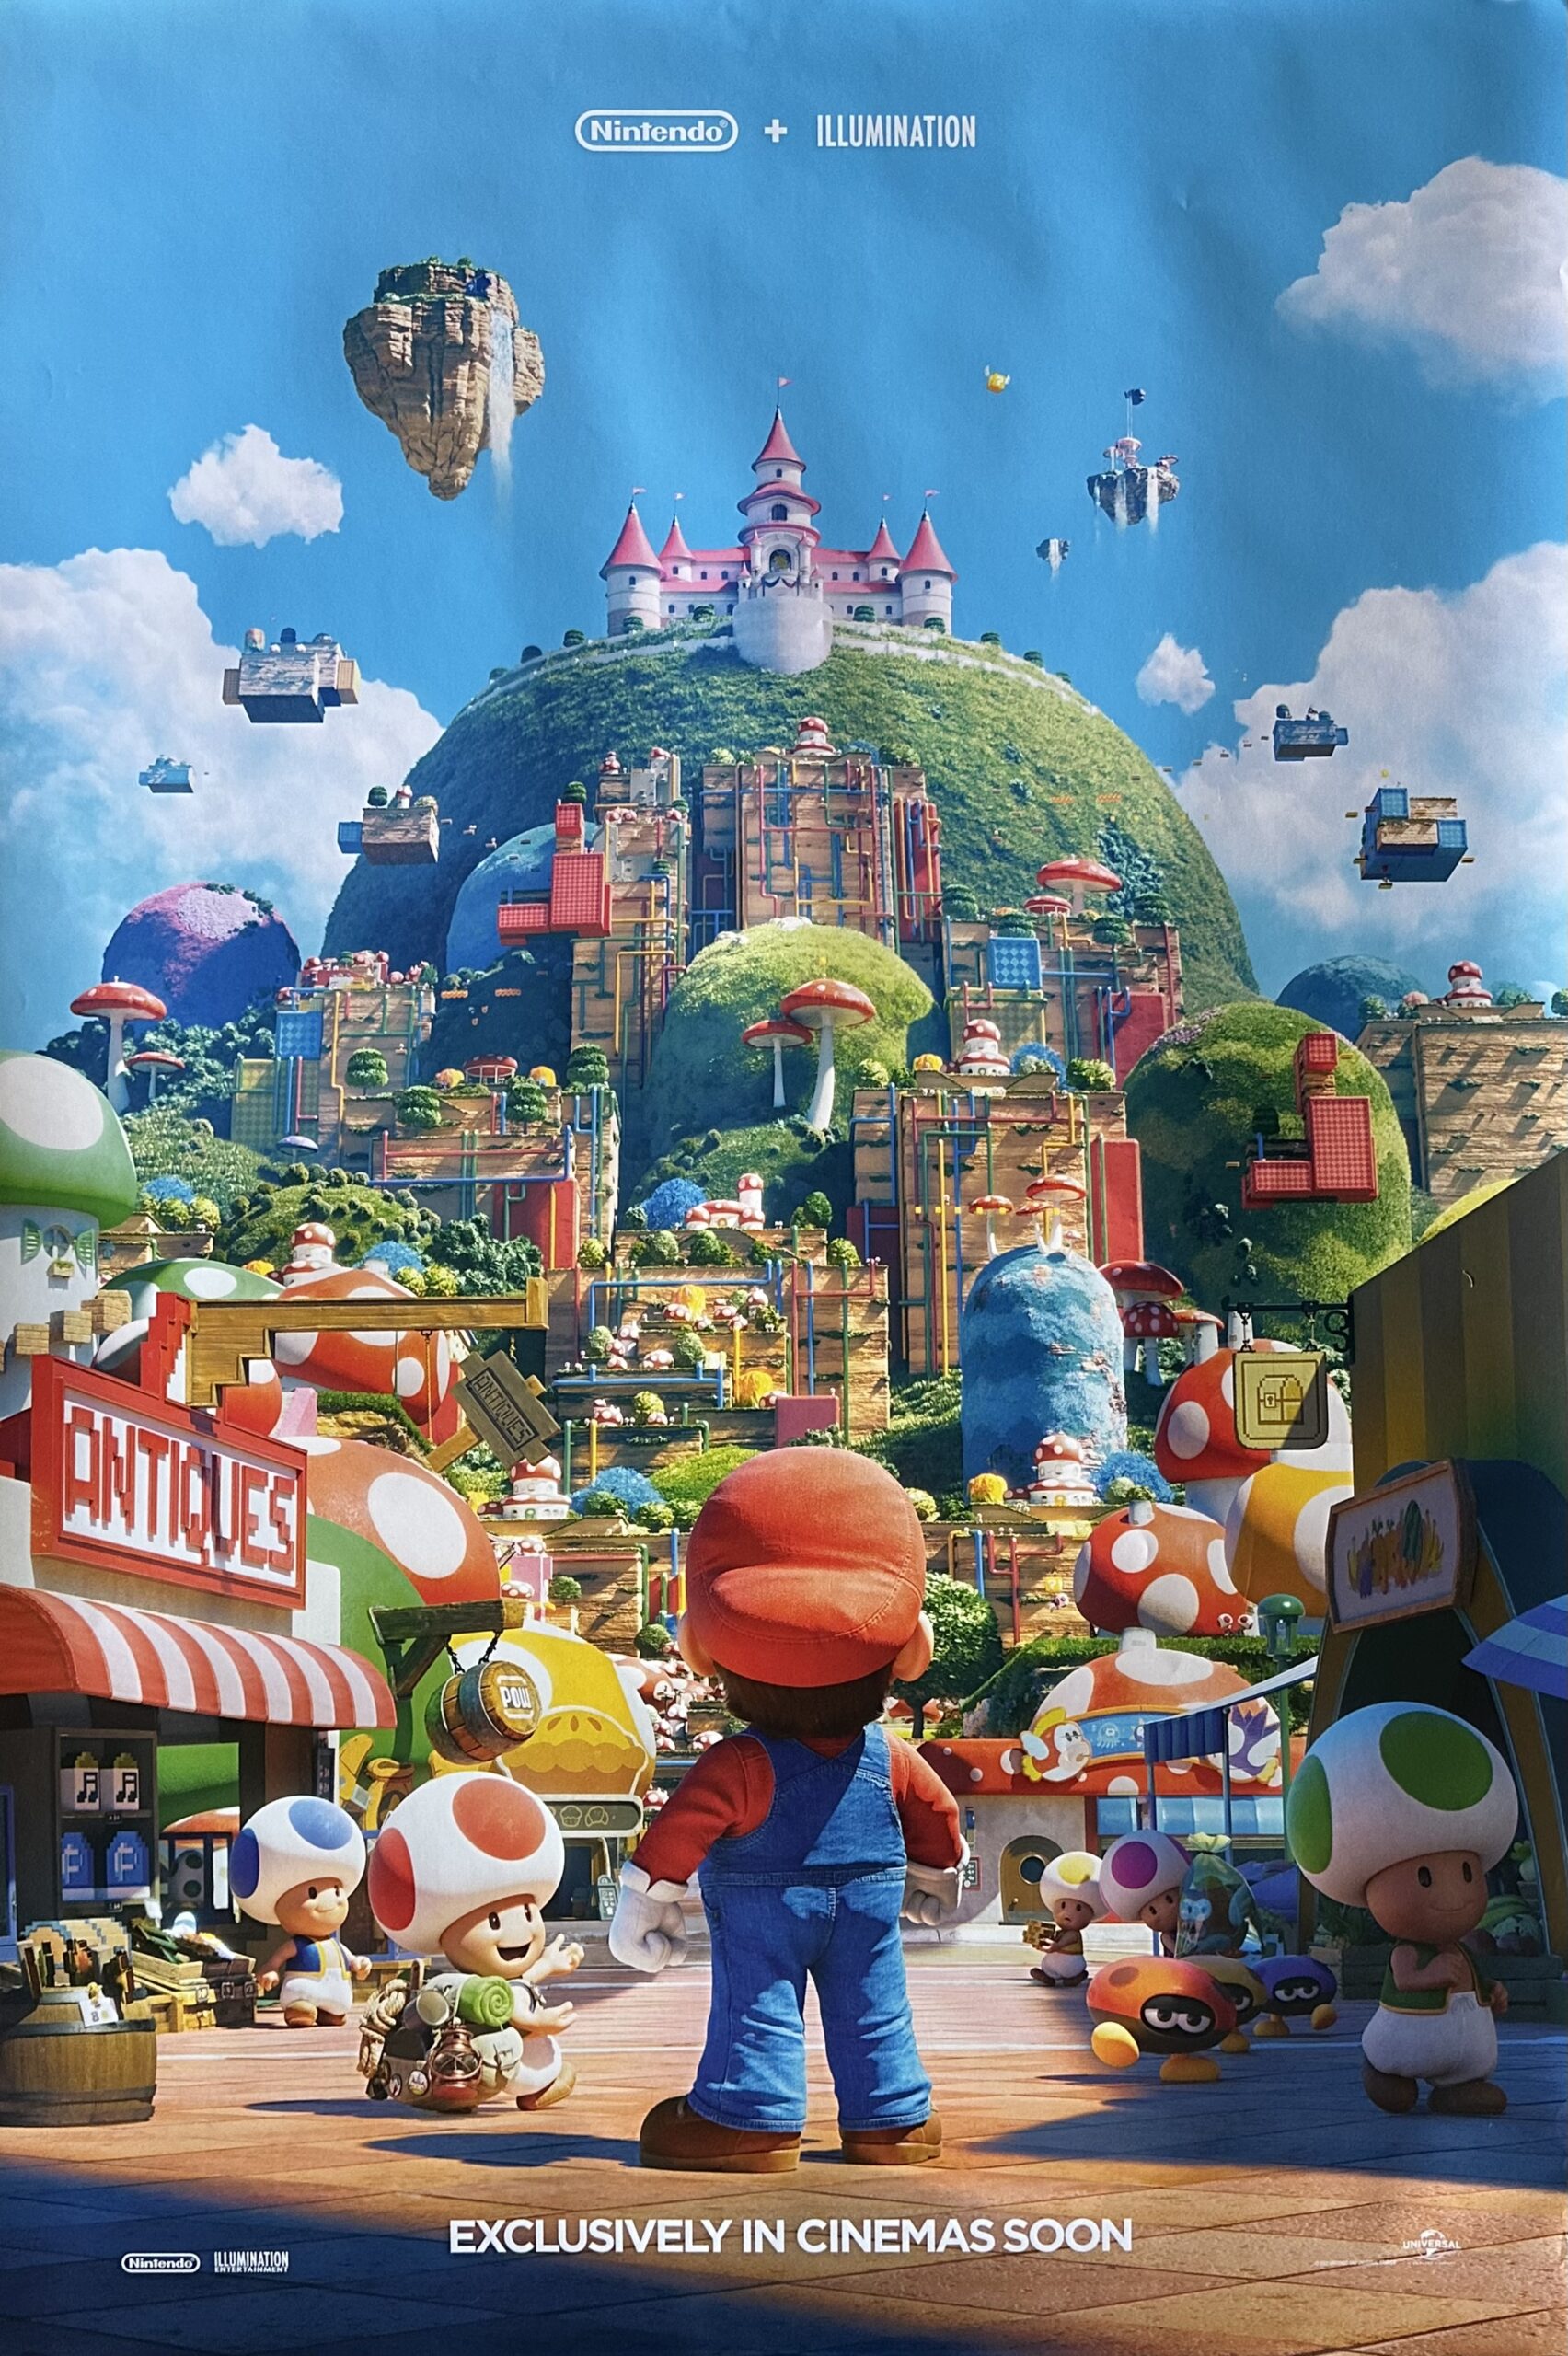 Nintendo Releases Two New Posters for The Super Mario Bros. Movie